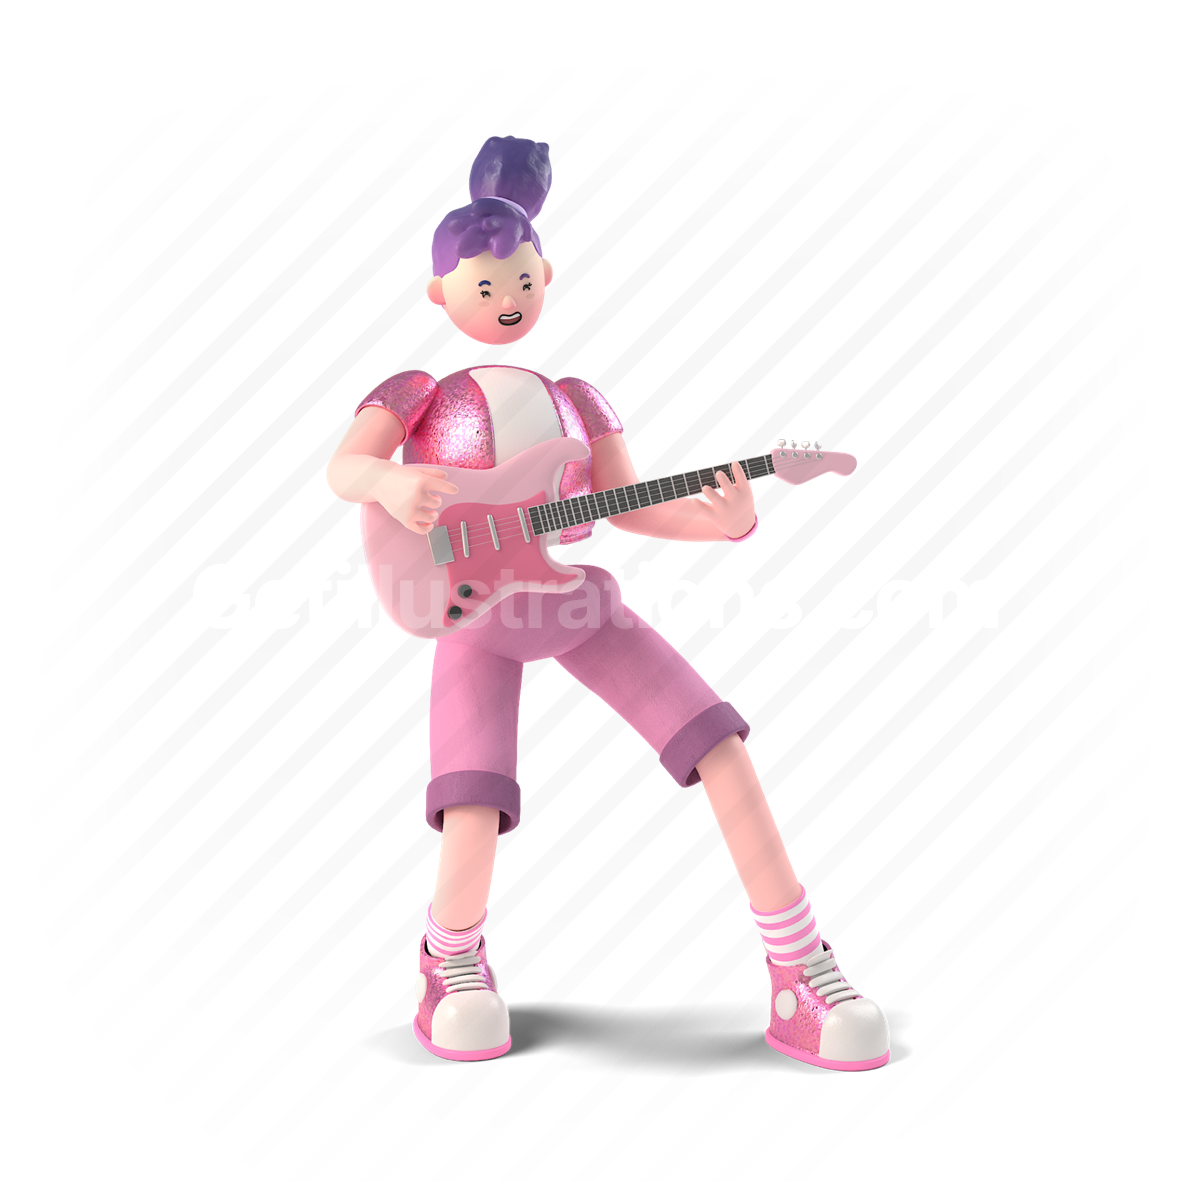 3d, people, person, character, musician, guitar, instrument, pixie, girl